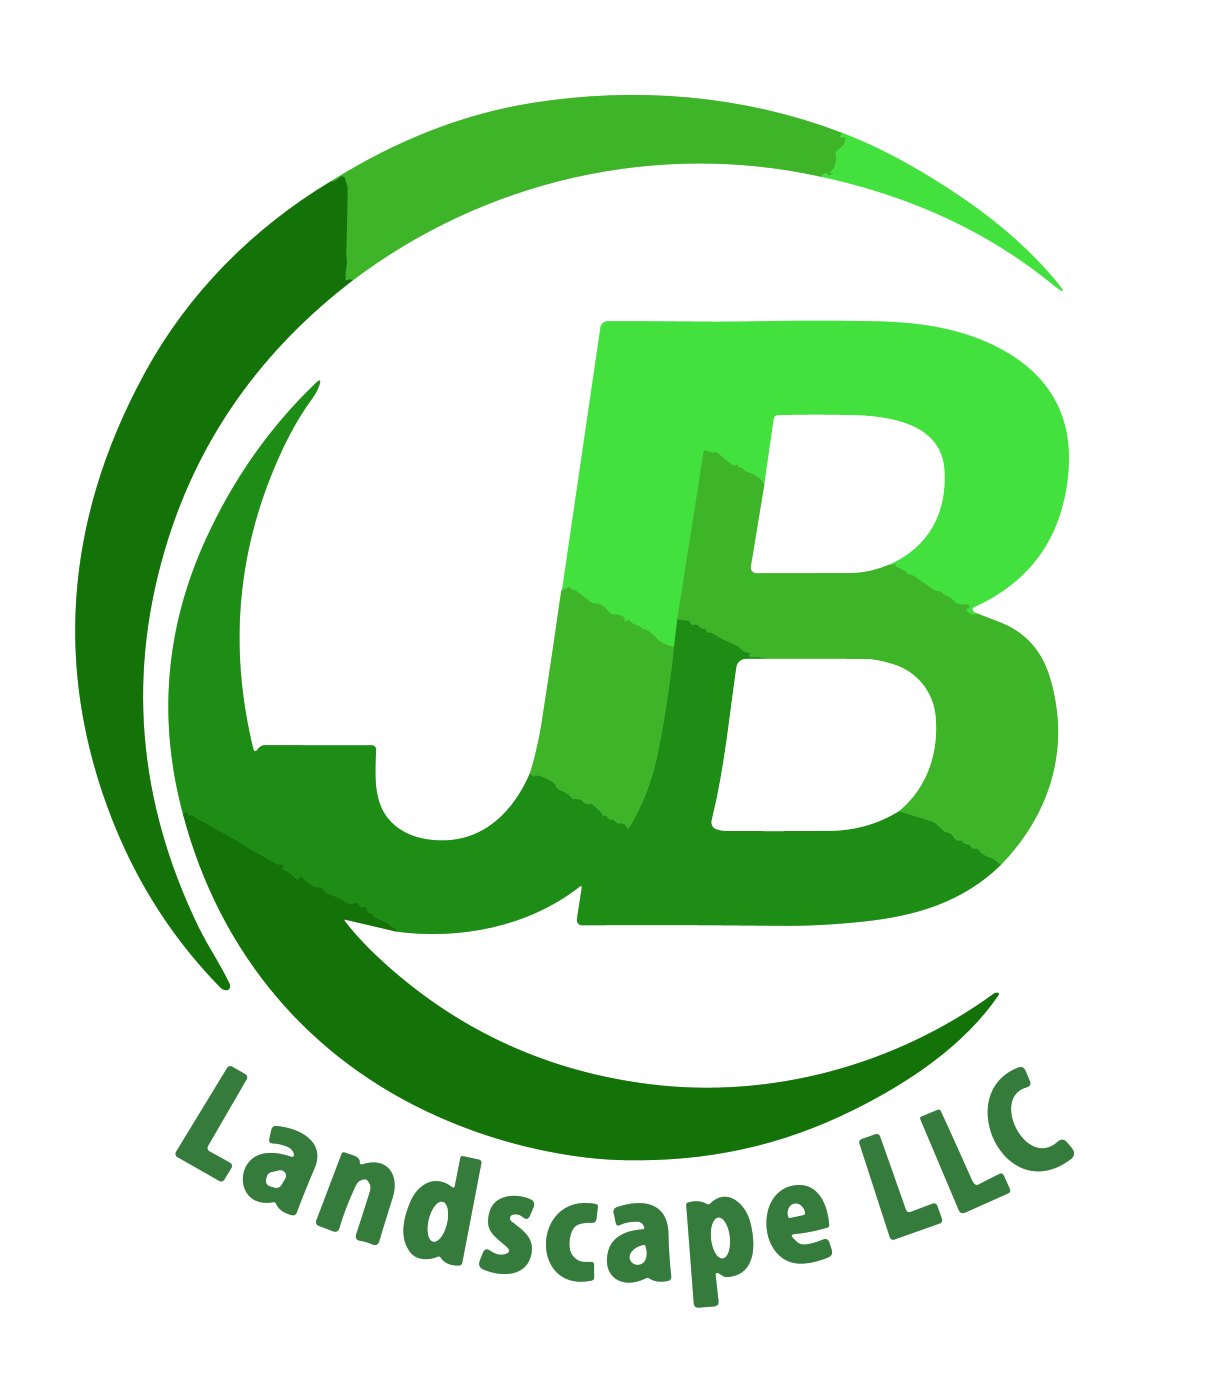 JB Landscape LLC offers services of Landscape Design, Retaining Walls, Concrete Work, Fence Install, Grass Planting and Installations, New Plants Install, Lawn Care, Mulching, Fertilizer Service, Maintenance Service, Tree Service., Palm Trimming., Irrigation System., Clean Ups., Gutters Clean Up in Eureka, O’Fallon, Town and Country, Chesterfield, University city, St Charles, Wentzville, Lake St. Louis, St. Louis, Write city - Landscape Design